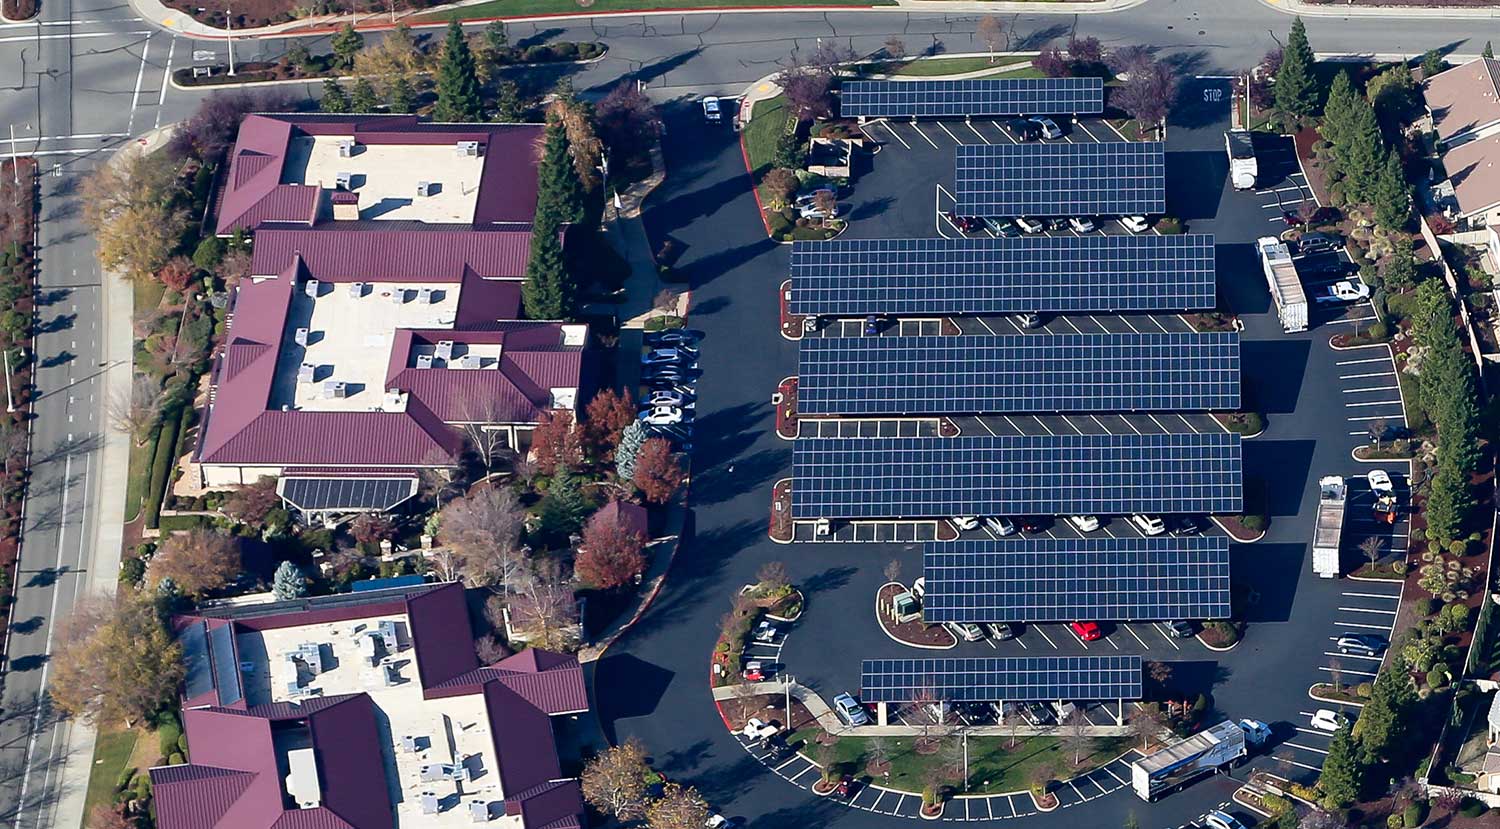  Home Owners Association California | 1.5 Megawatts Photography courtesy of Sunworks 